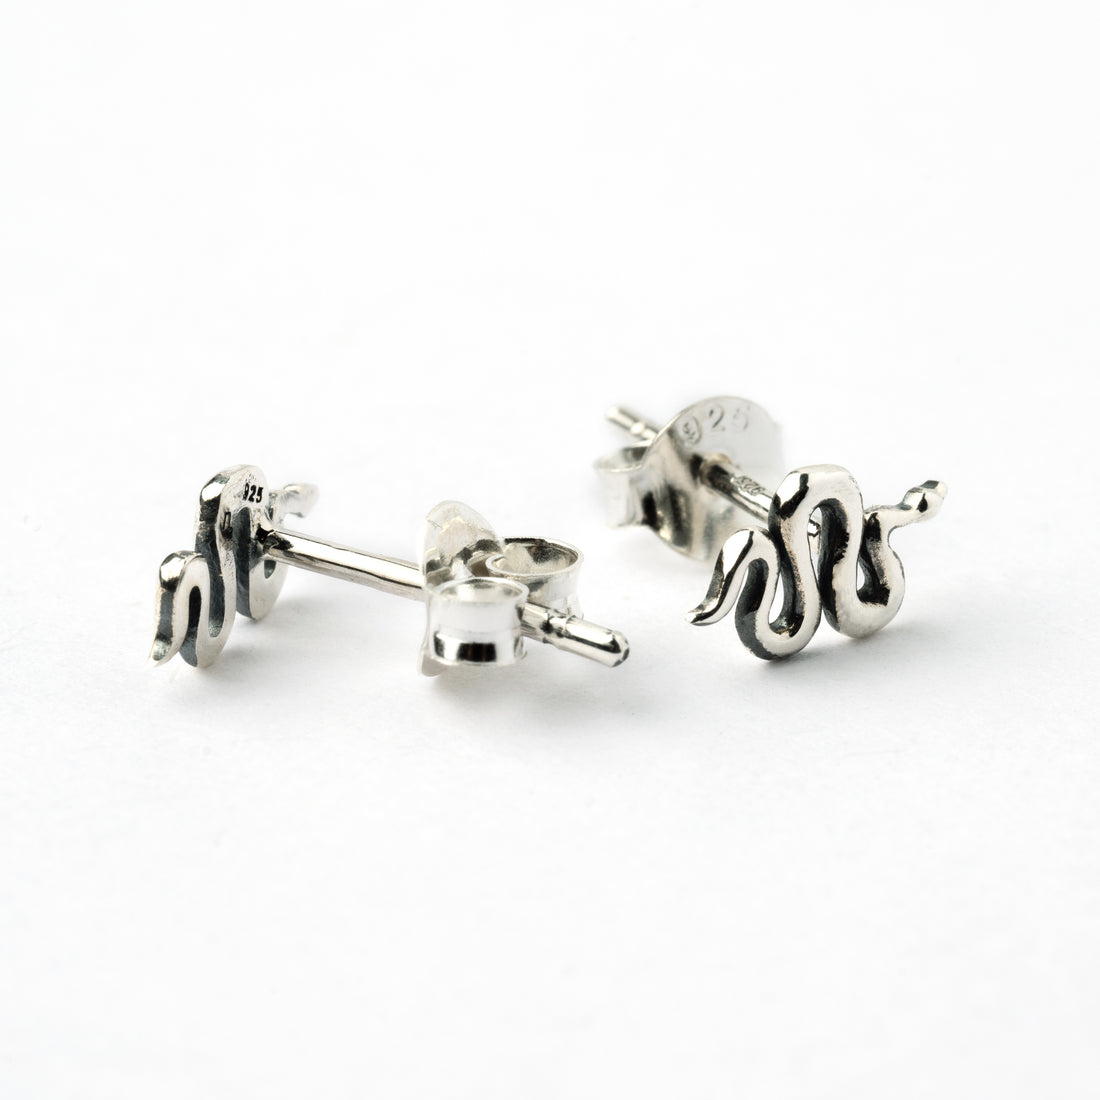 Snake silver stud earrings right side and back view